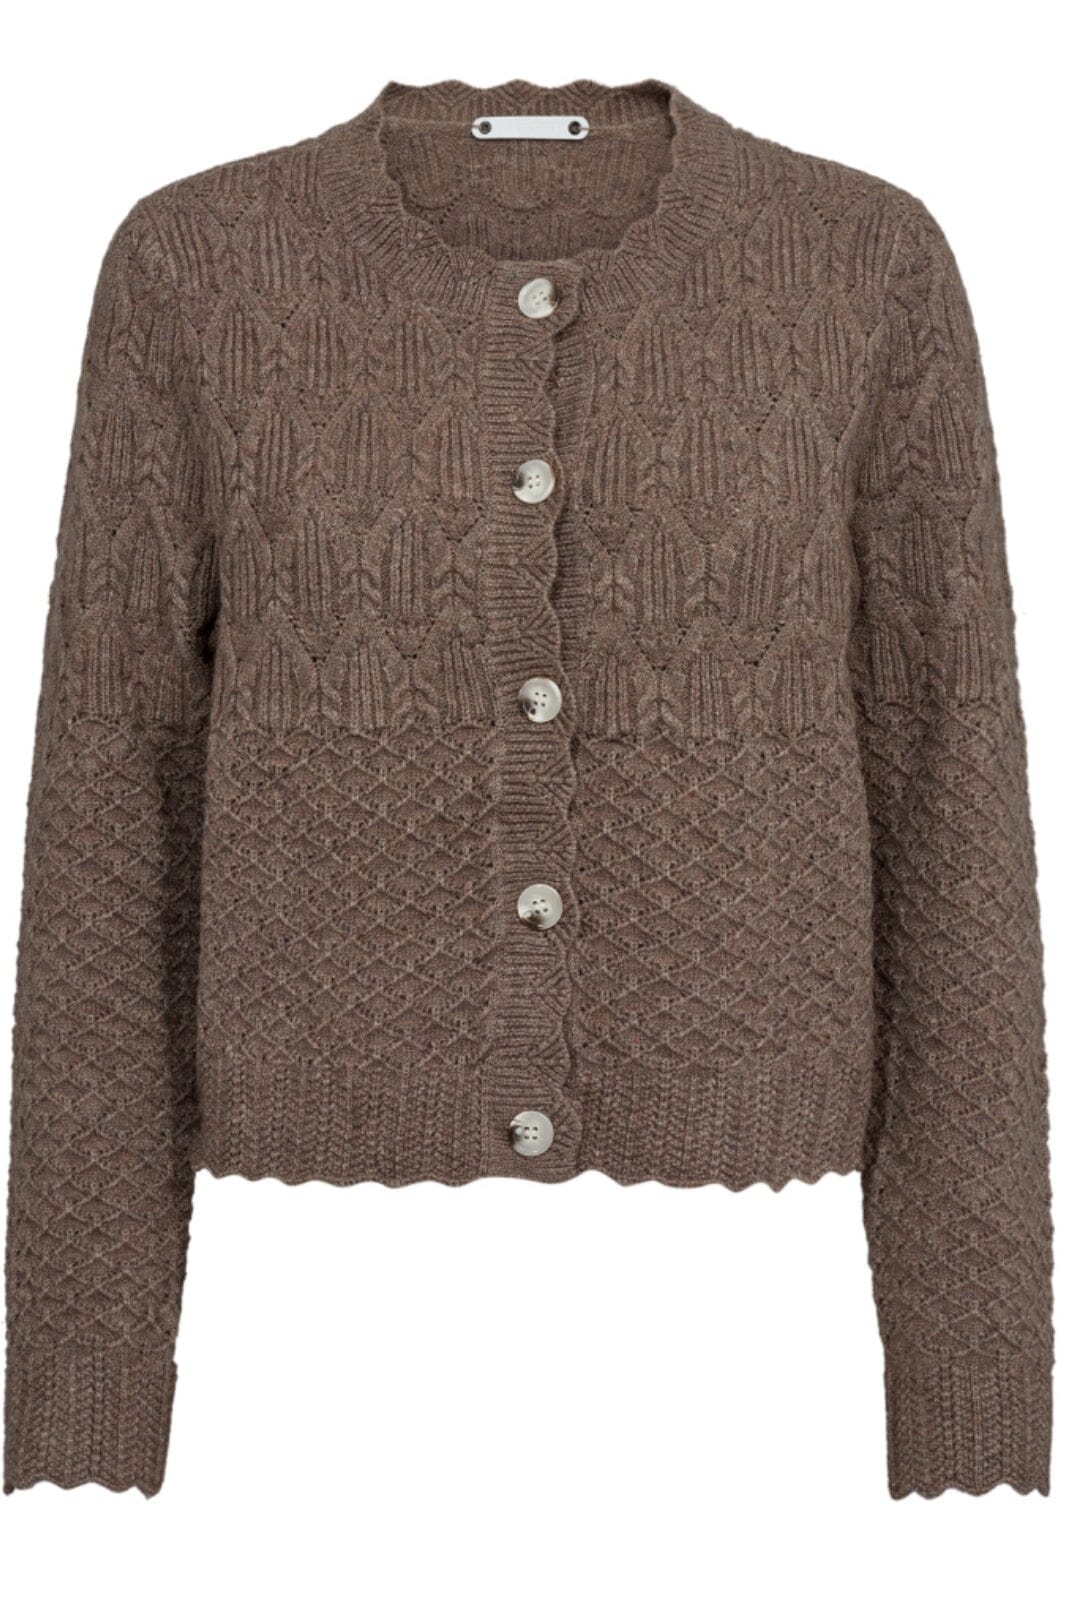 Co´couture - Pointellecc Cardigan 32130 - 154 Walnut Cardigans 